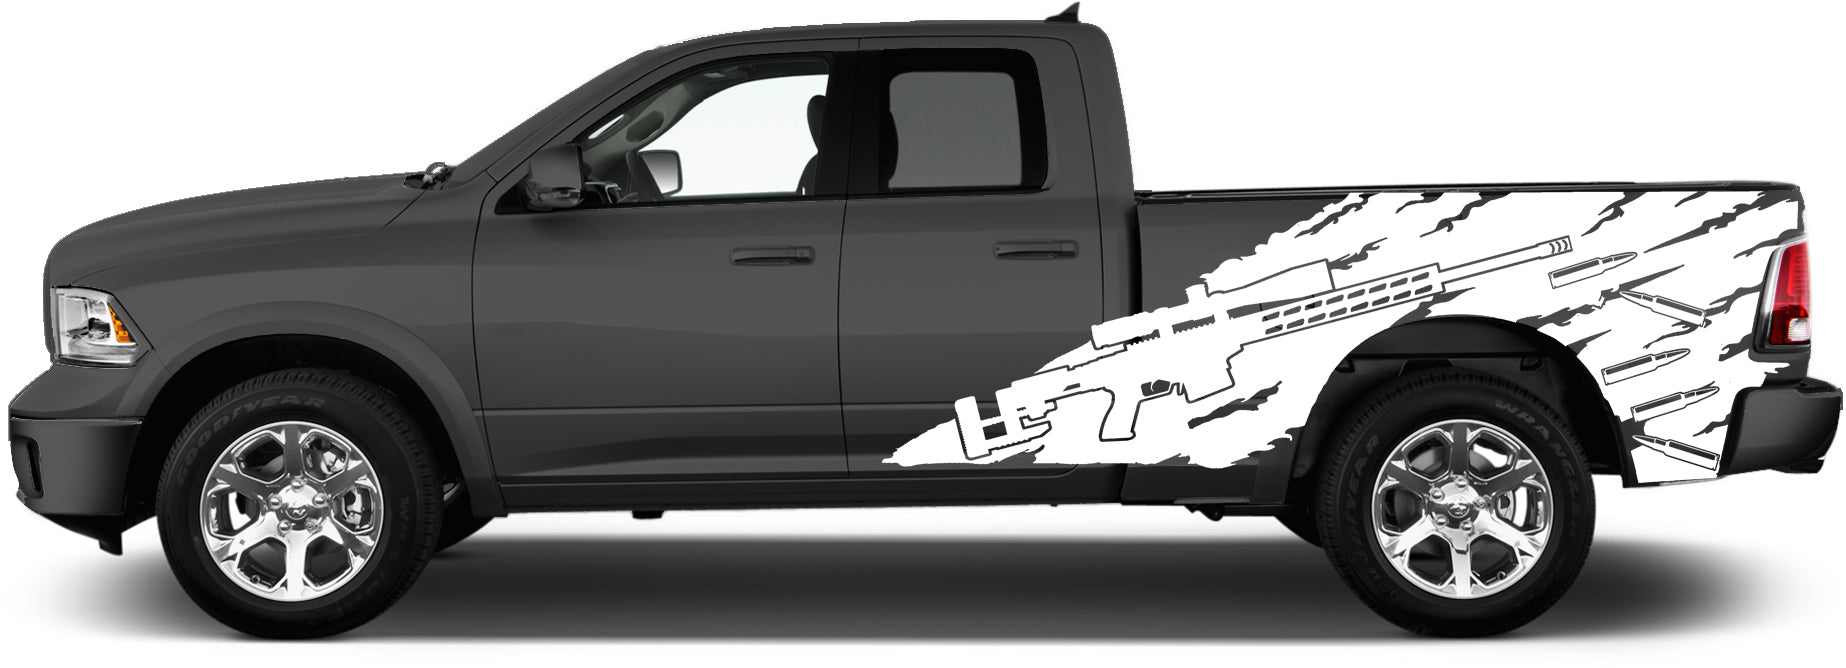 sniper side decal for dodge ram 2009 to 2018 models white